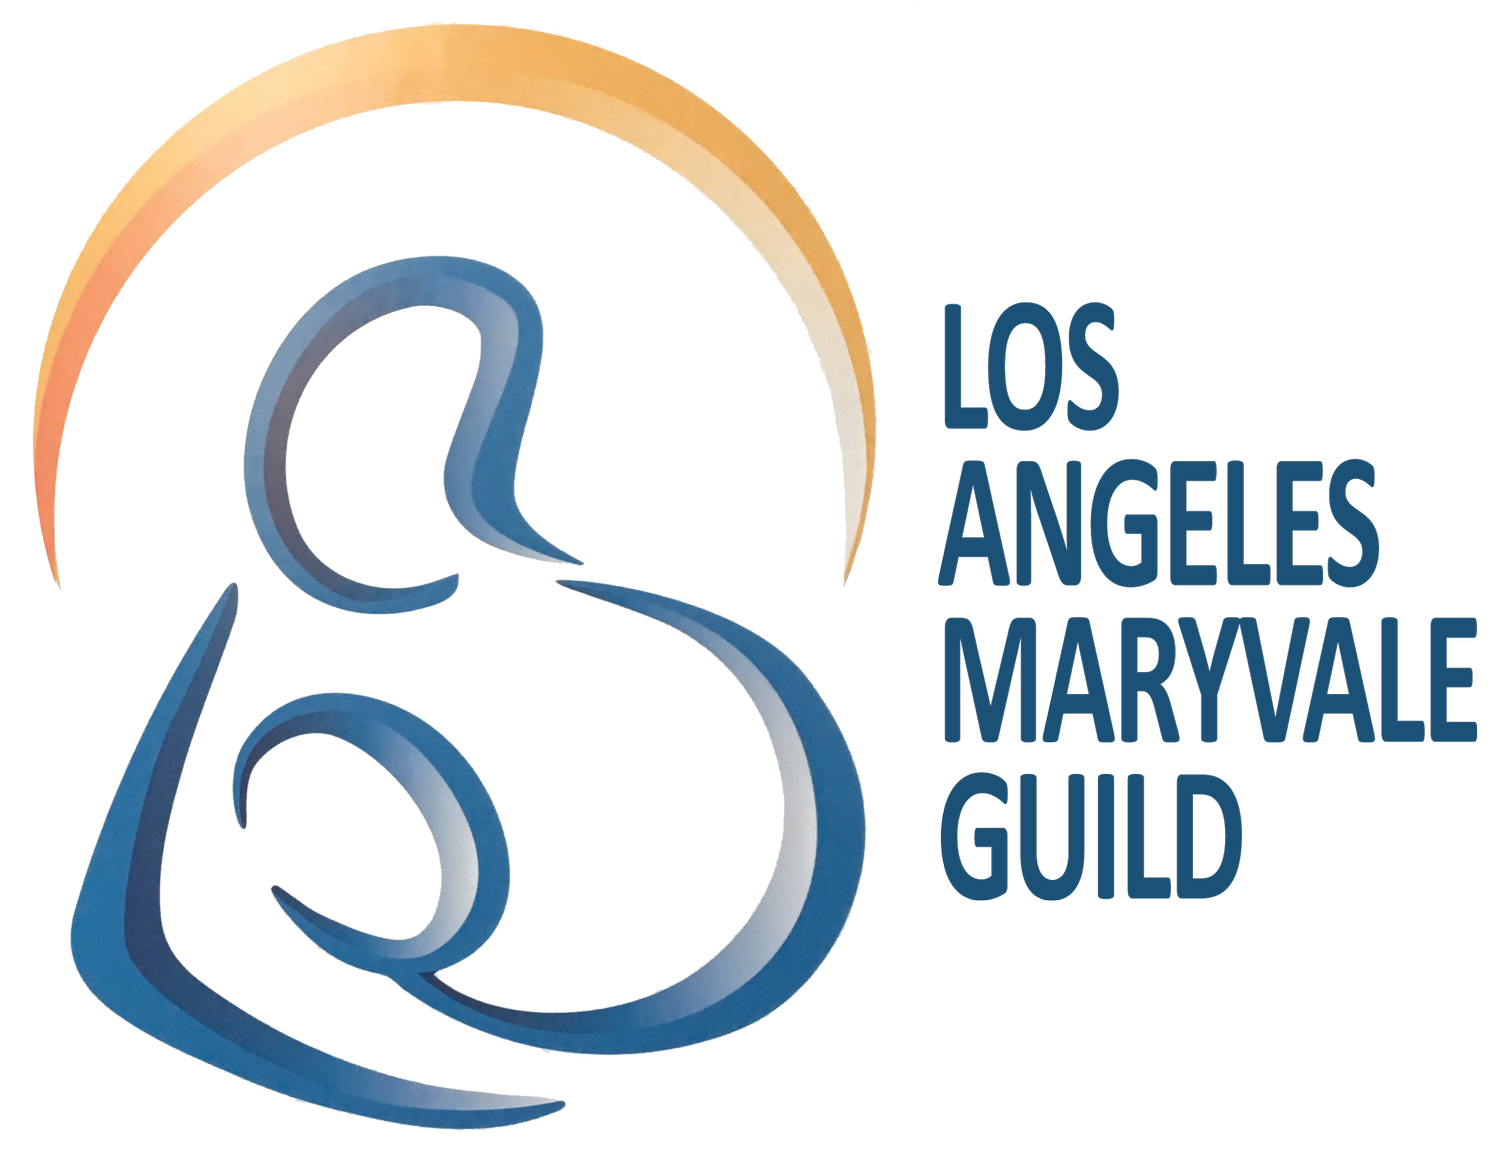 Los Angeles Maryvale Guild